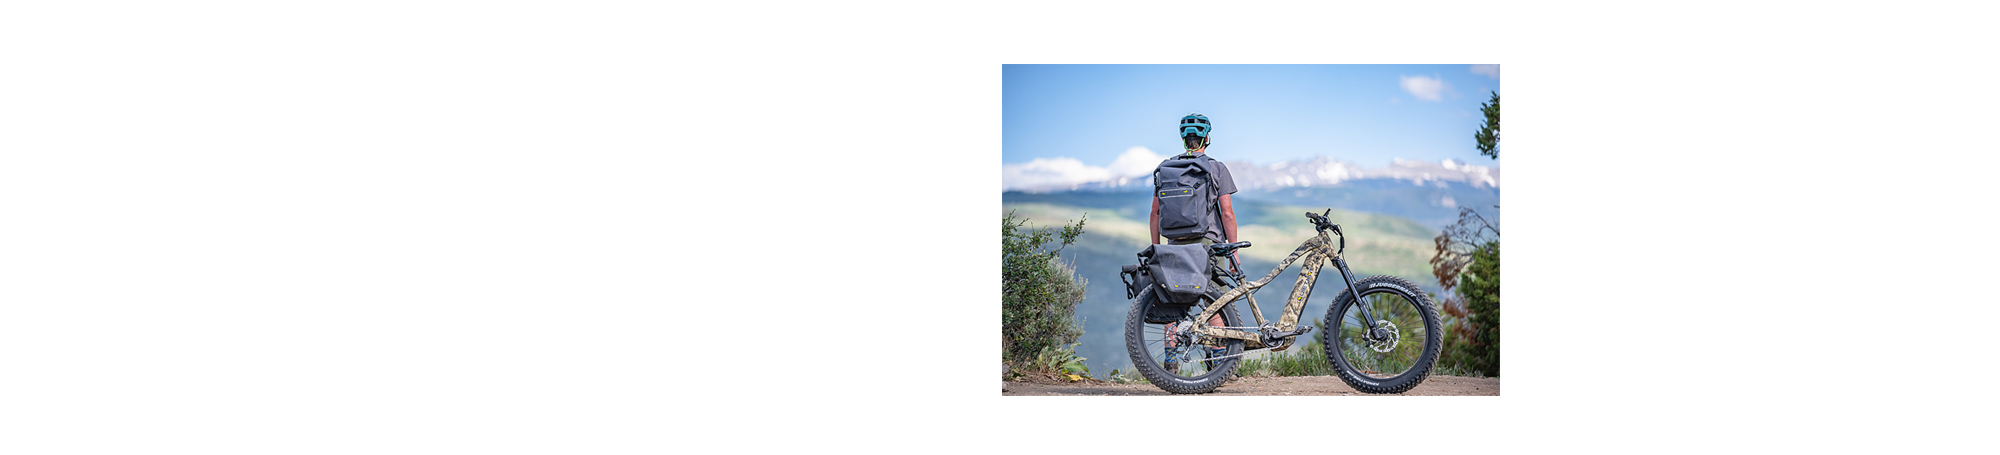 Man with his e-bike looking at mountains